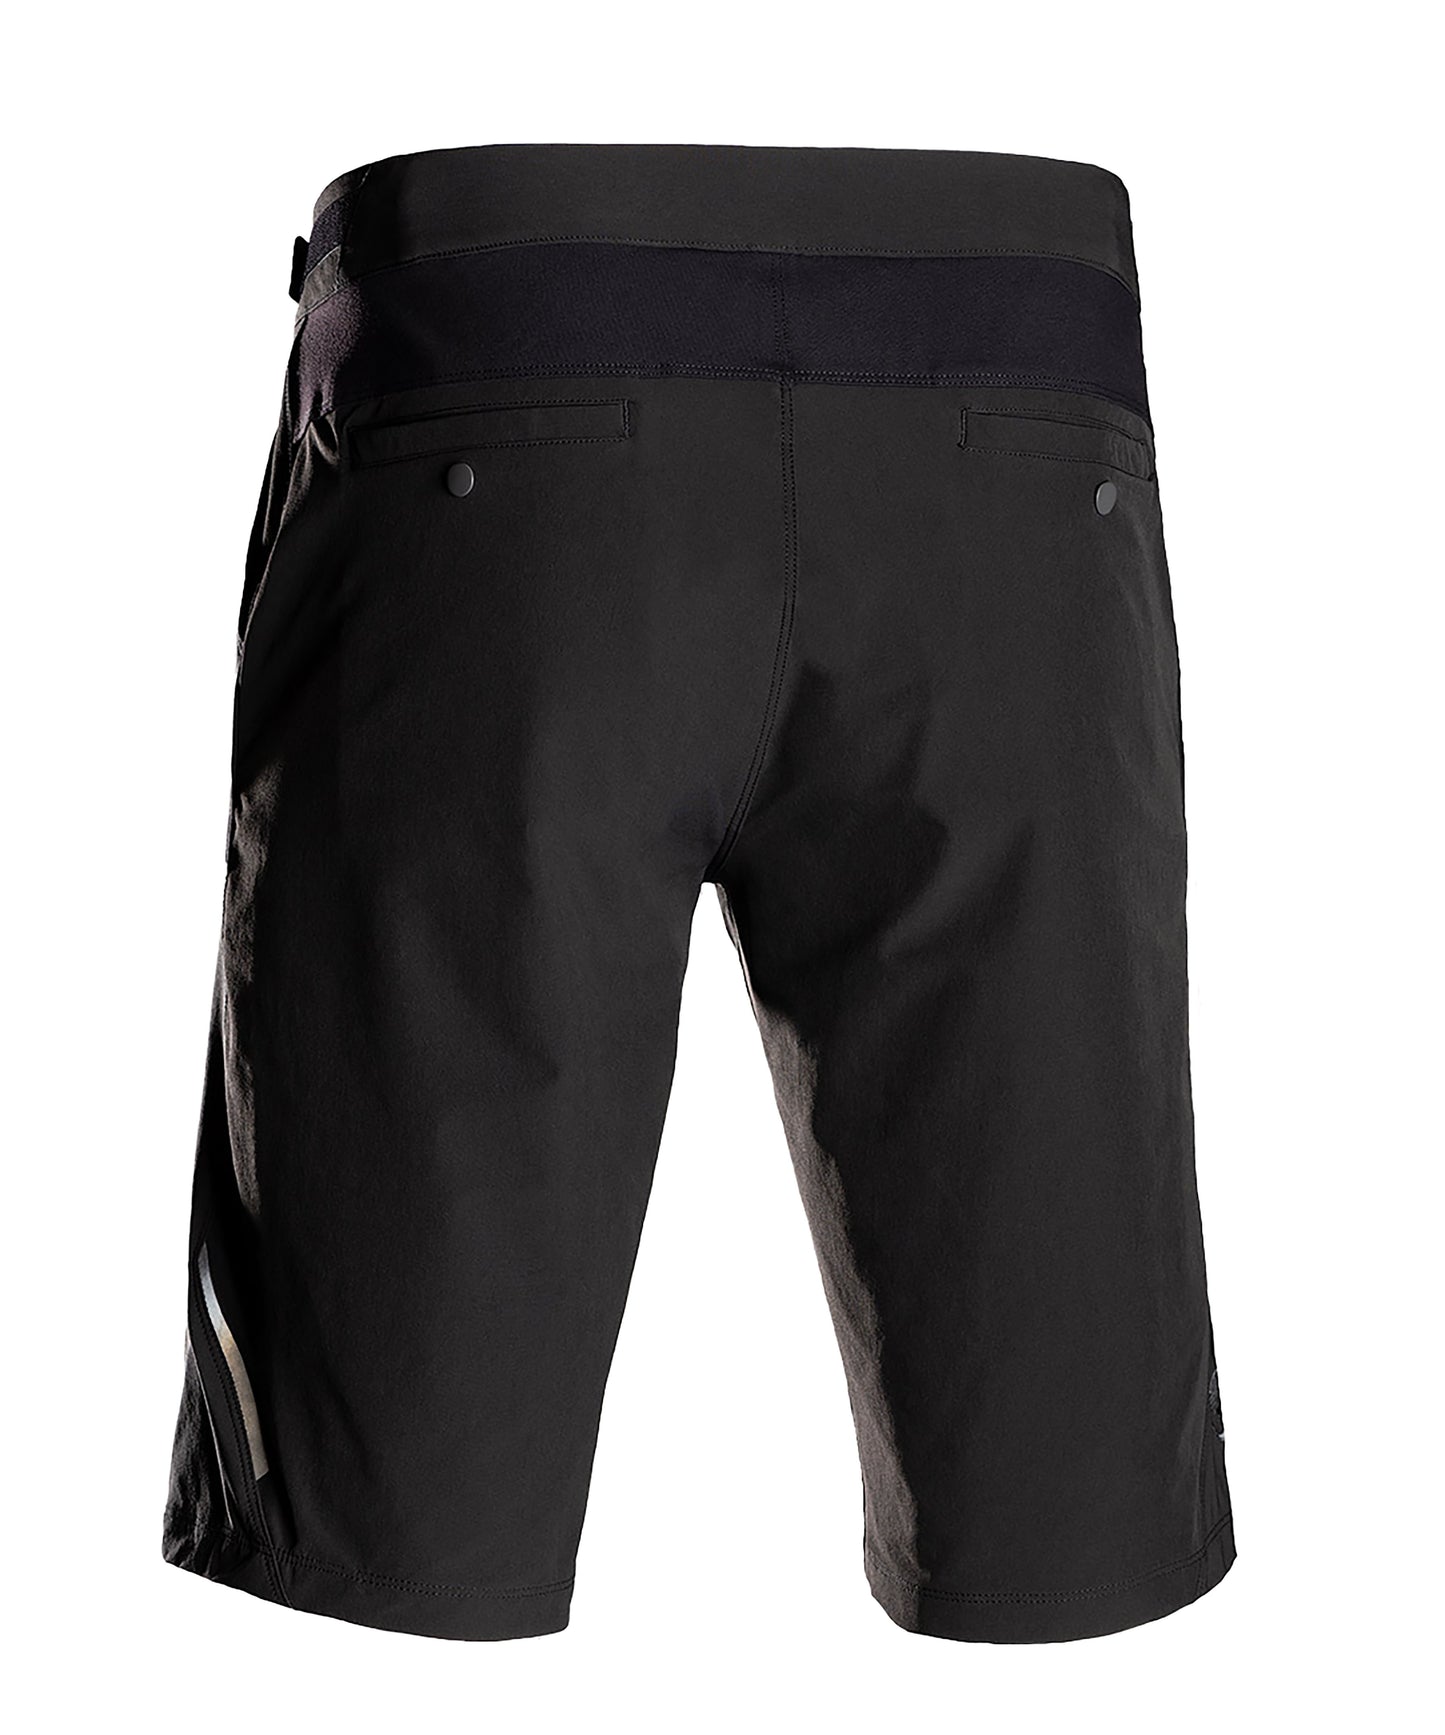 Men's Cross Country DWR 11.5” Shorts